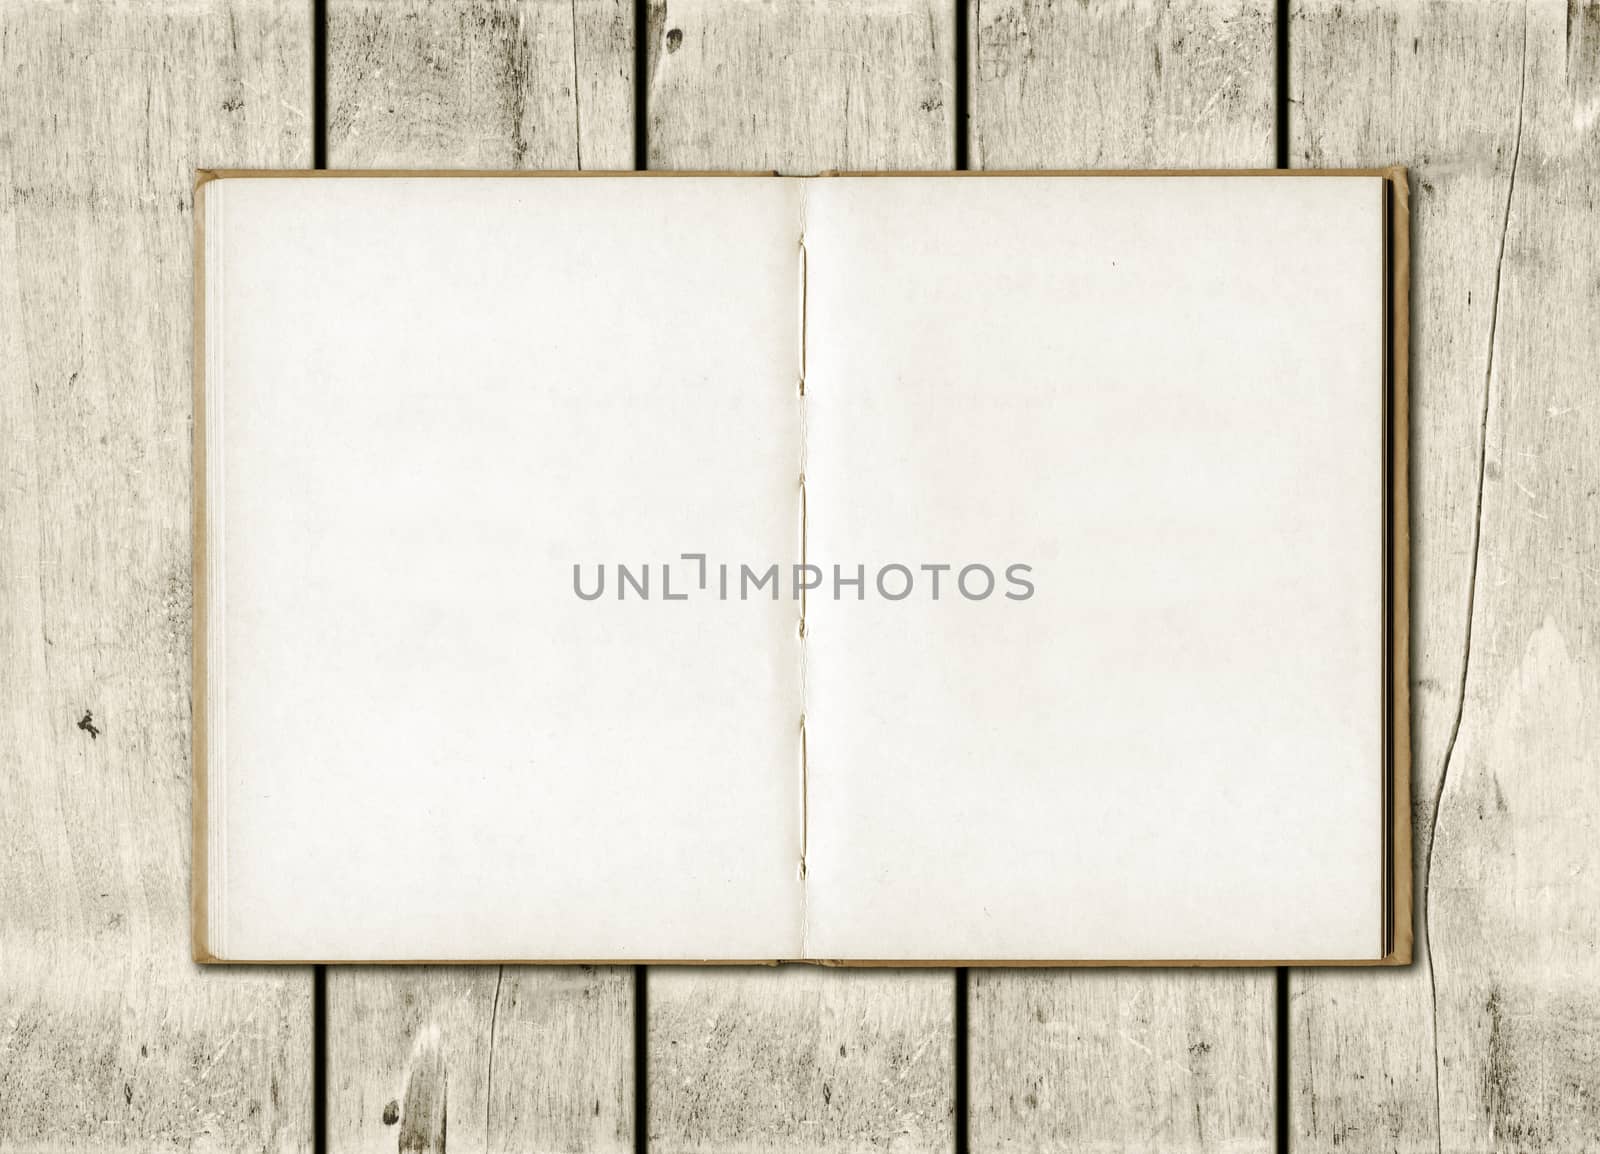 Blackboard on a old white wood wall background texture